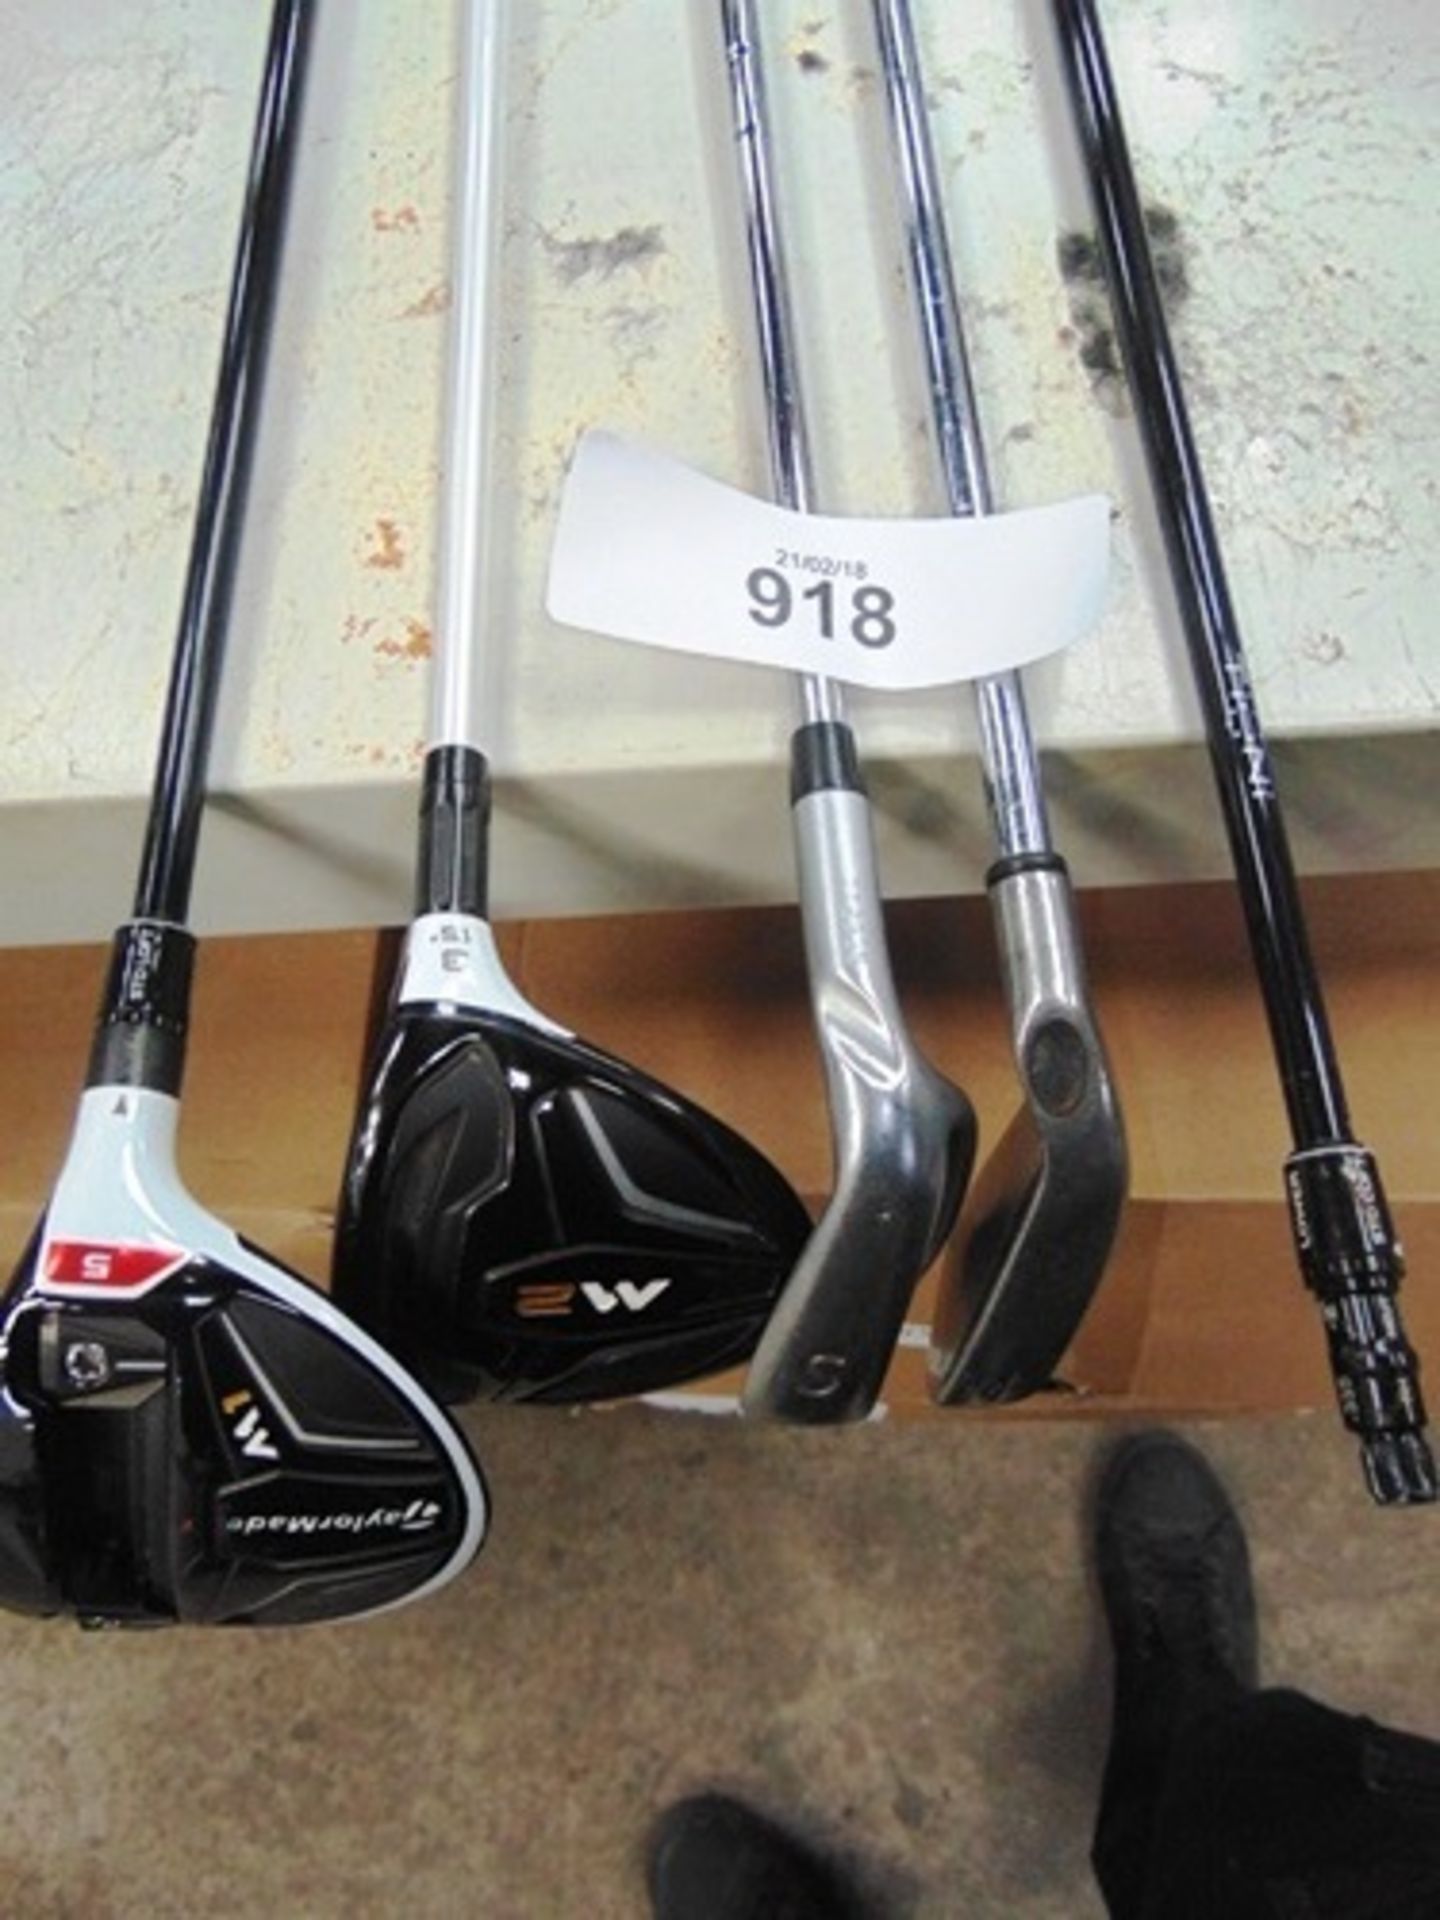 1 x Taylormade M2 No. 3 club, 1 x Taylormade M1 No. 5 club, 1 x Ping 120 sand wedge, 1 x Callaway - Image 2 of 3